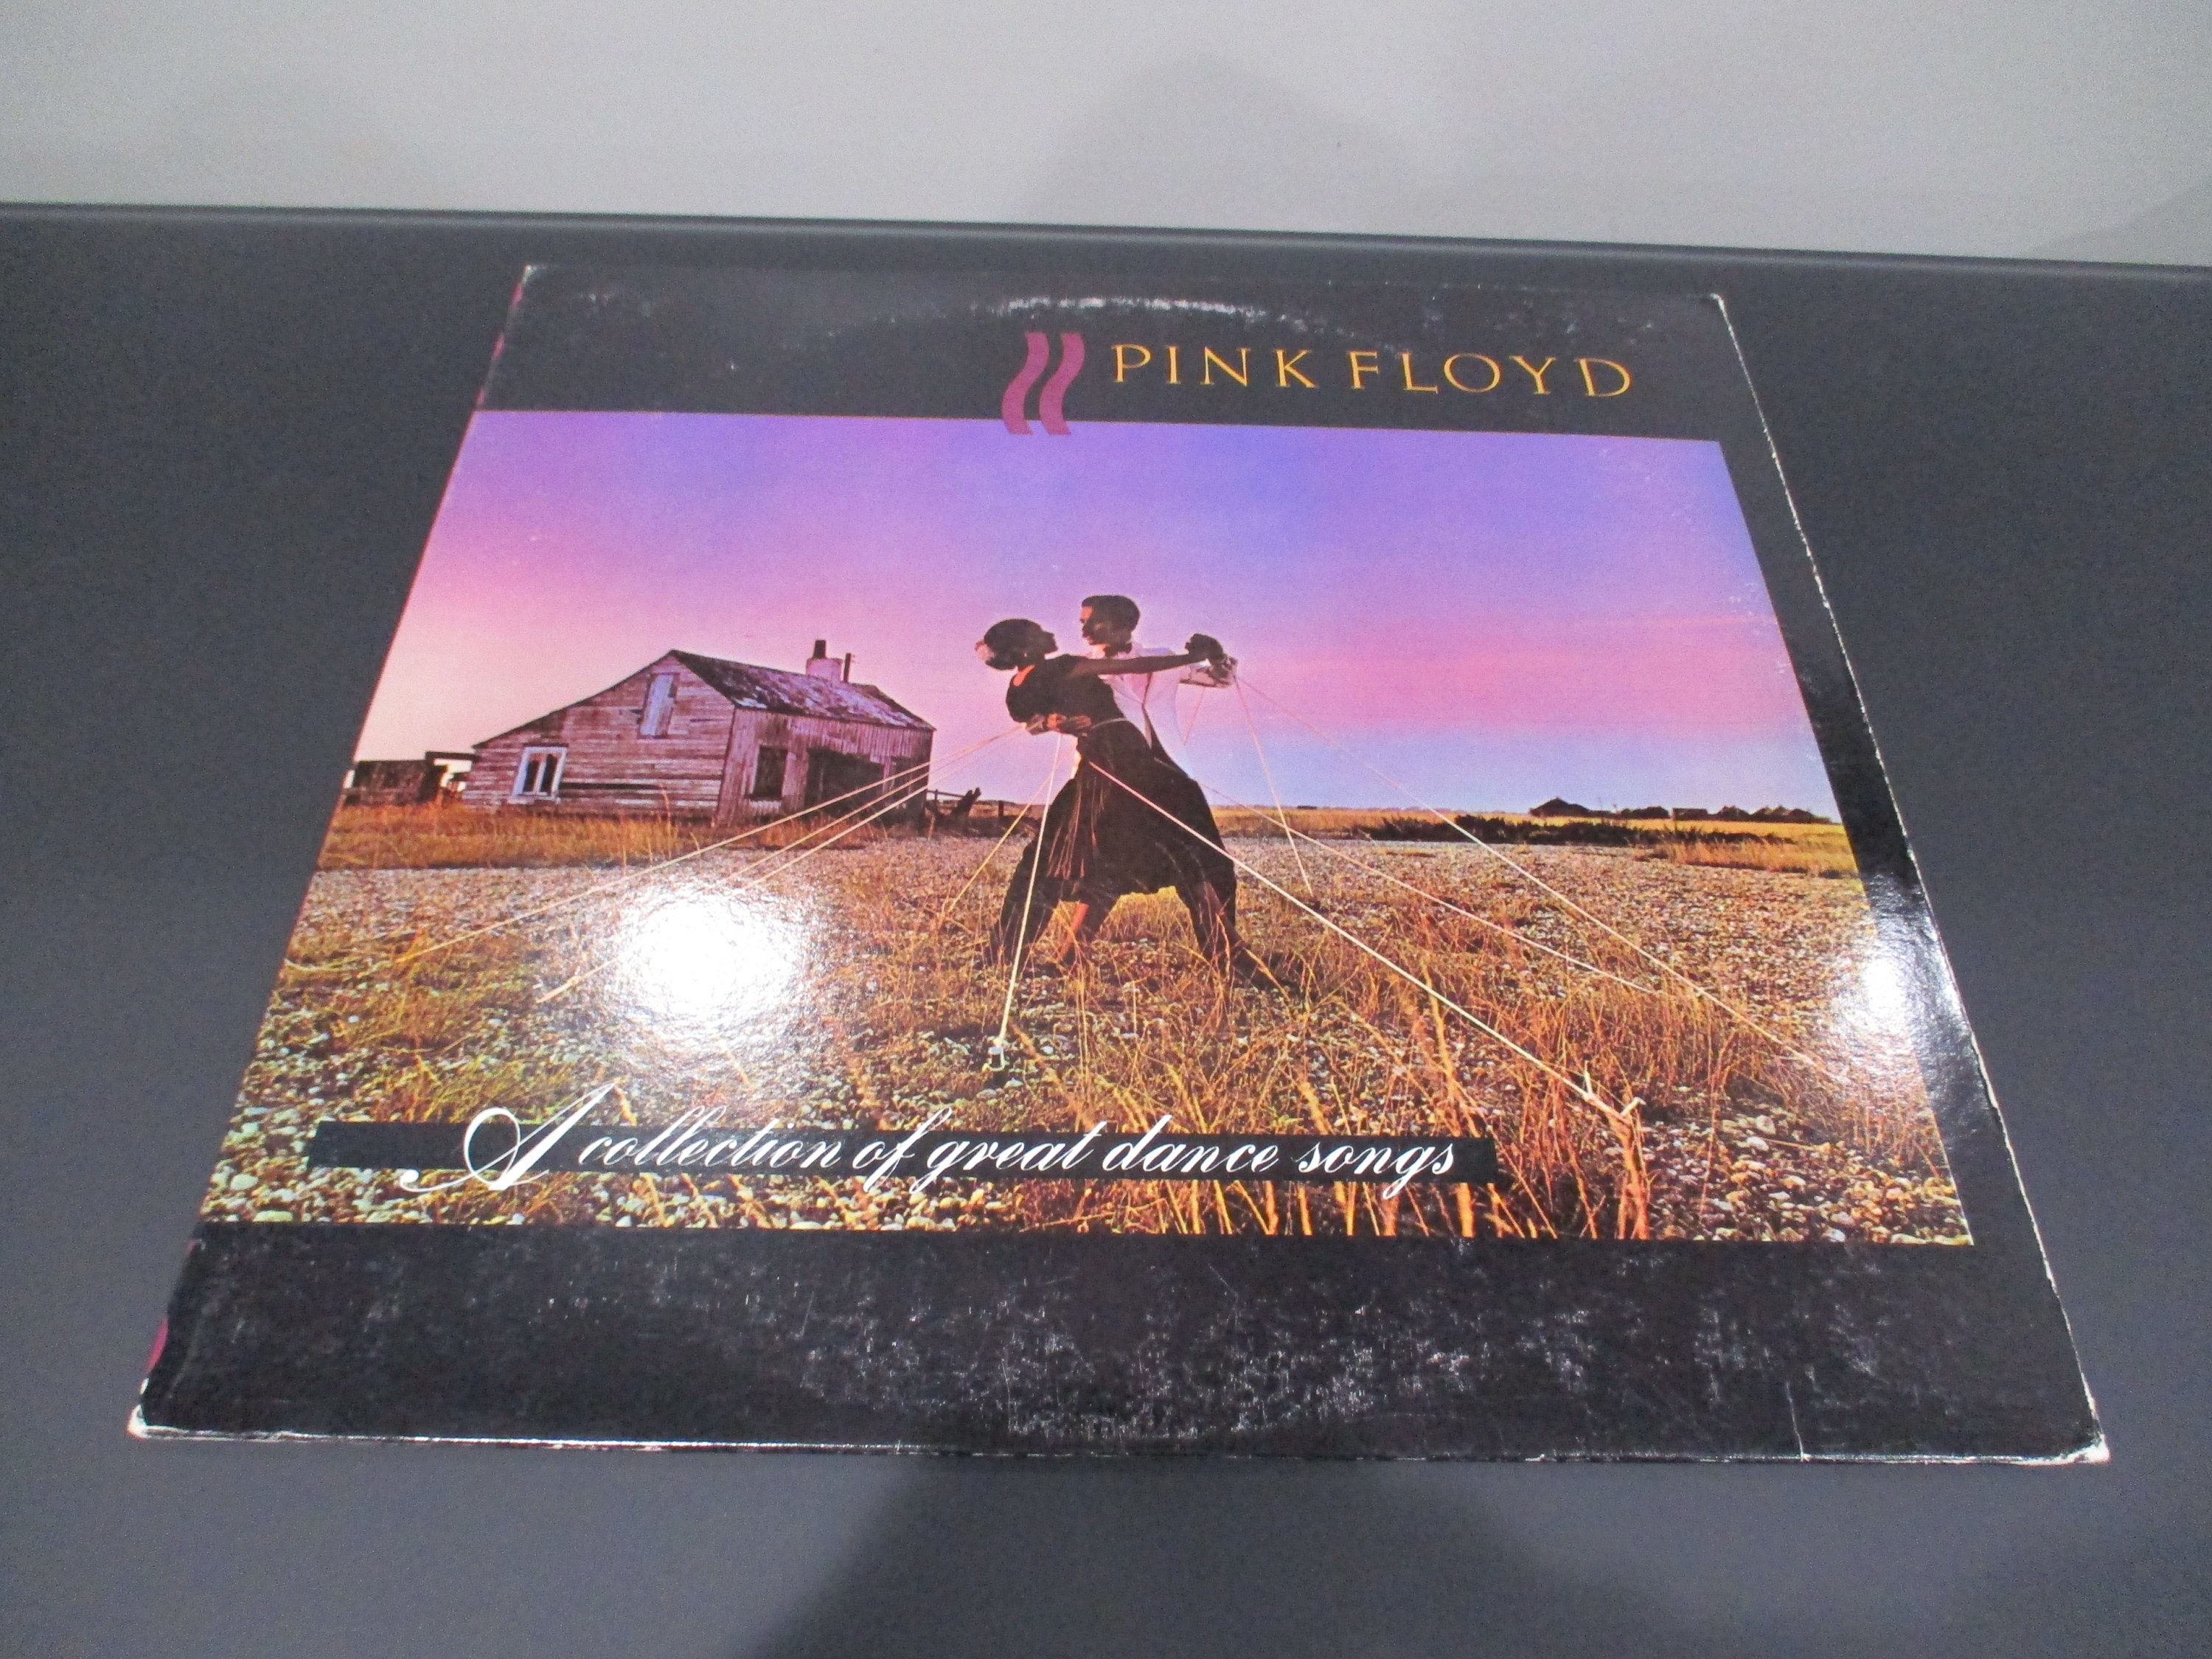 PINK FLOYD - A COLLECTION OF GREAT DANCE SONGS VINILO